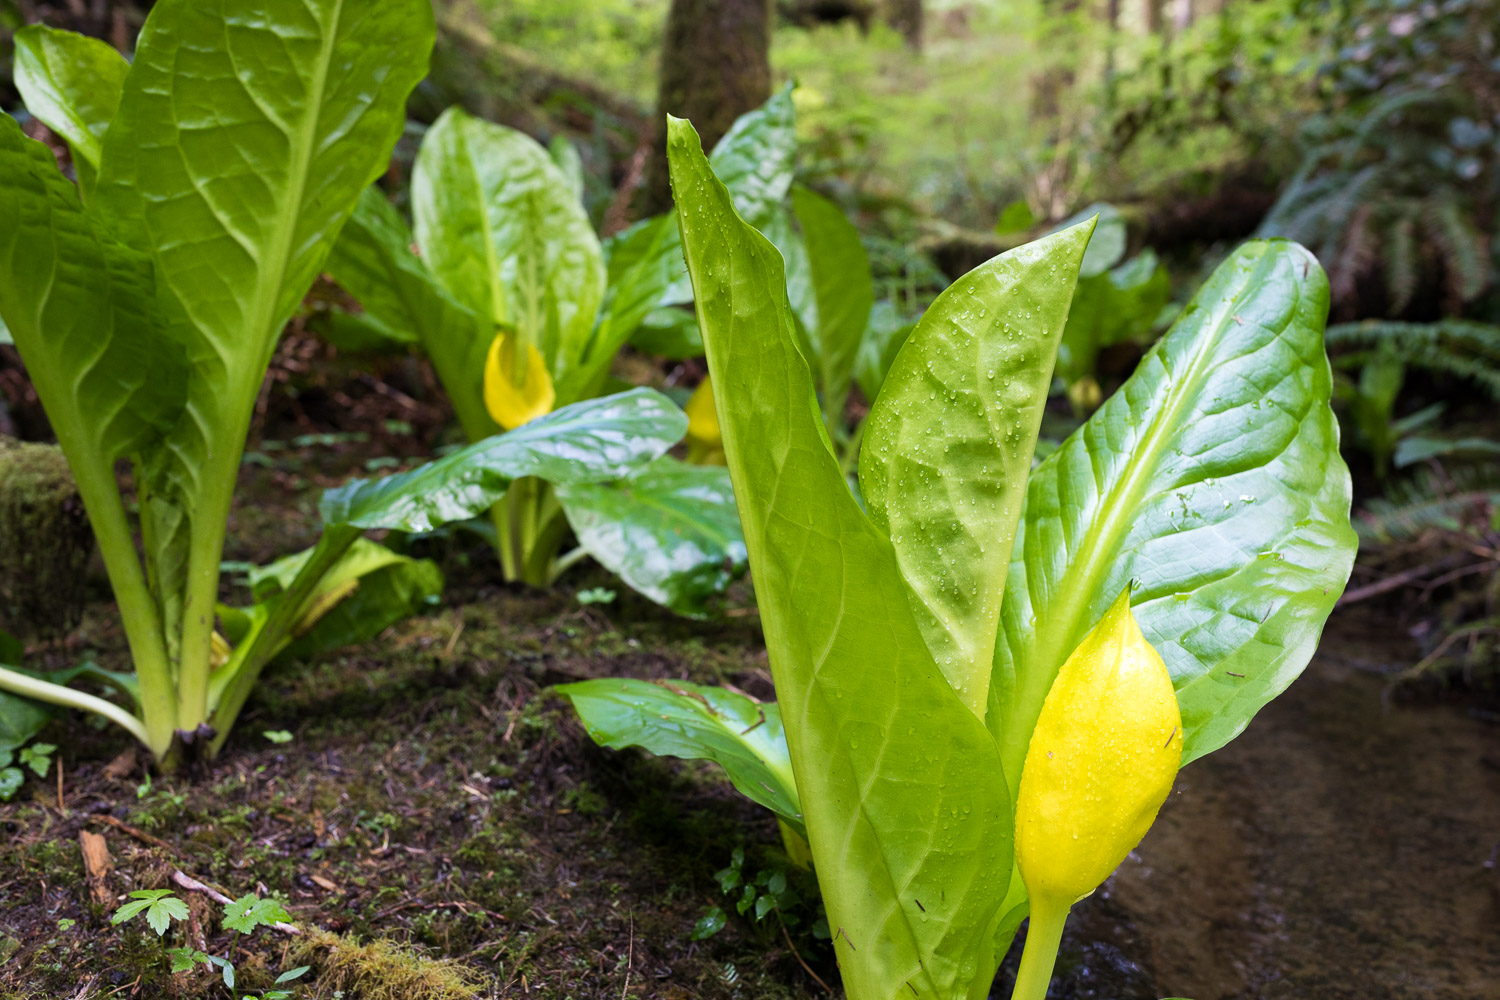 A group of western skunk cabbage plants begins to show their yellow flowers.